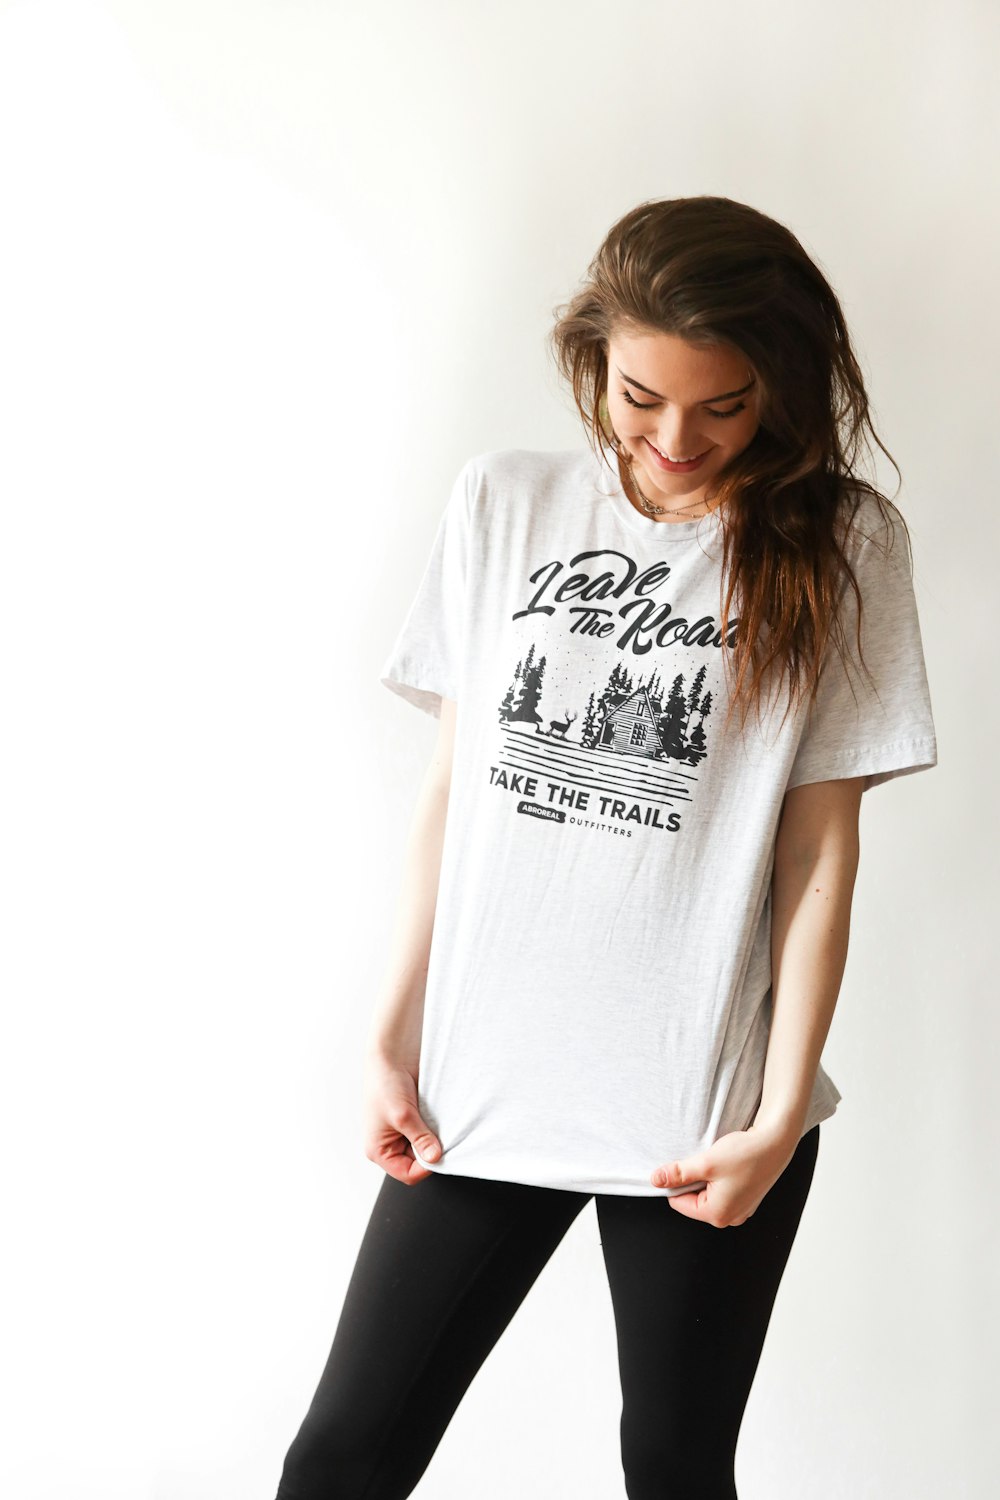 smiling woman in black and white print t-shirt